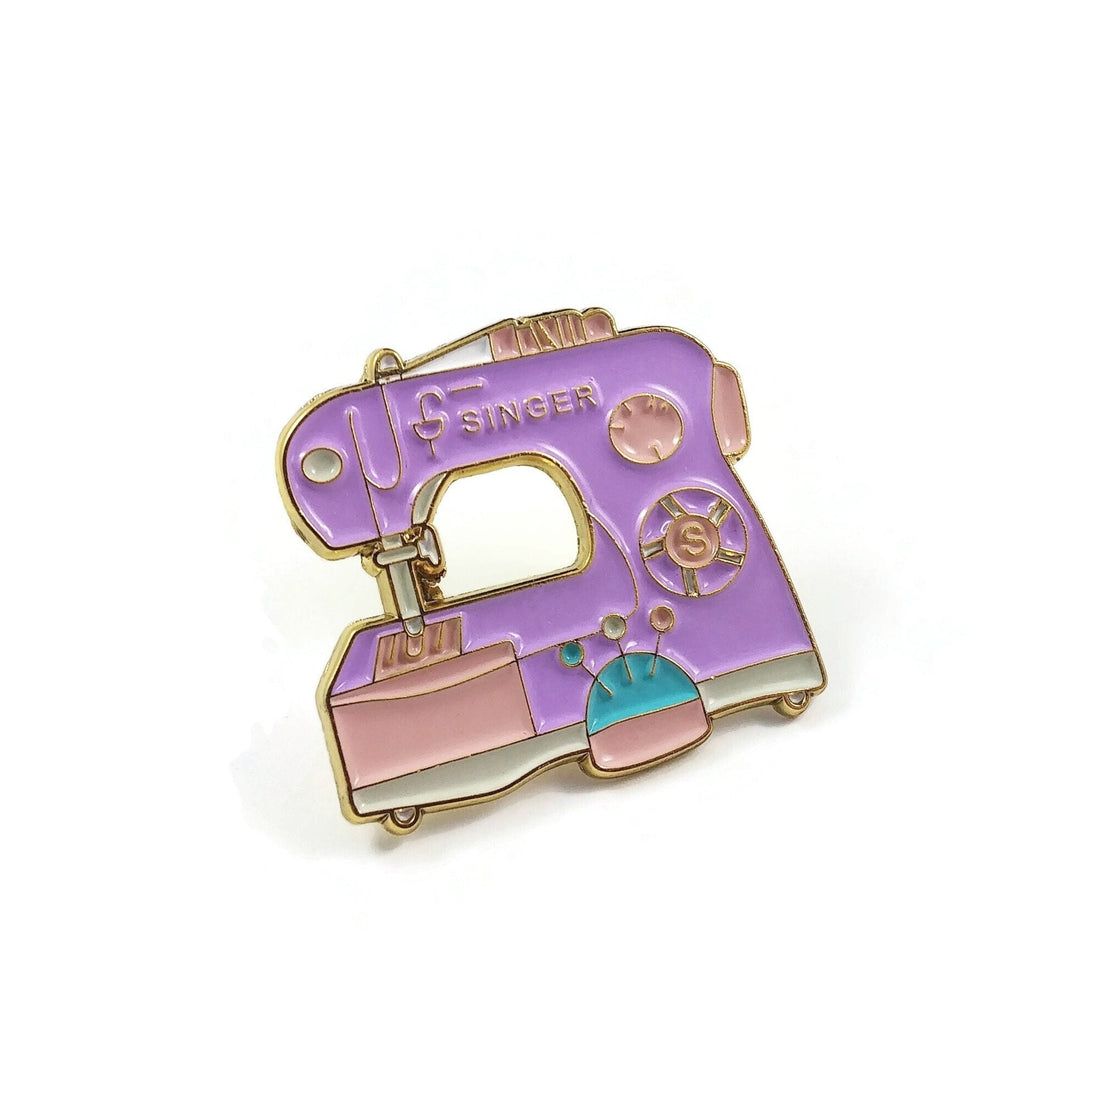 Sewing machine enamel pin, Sew lover brooch, Cute gift for her